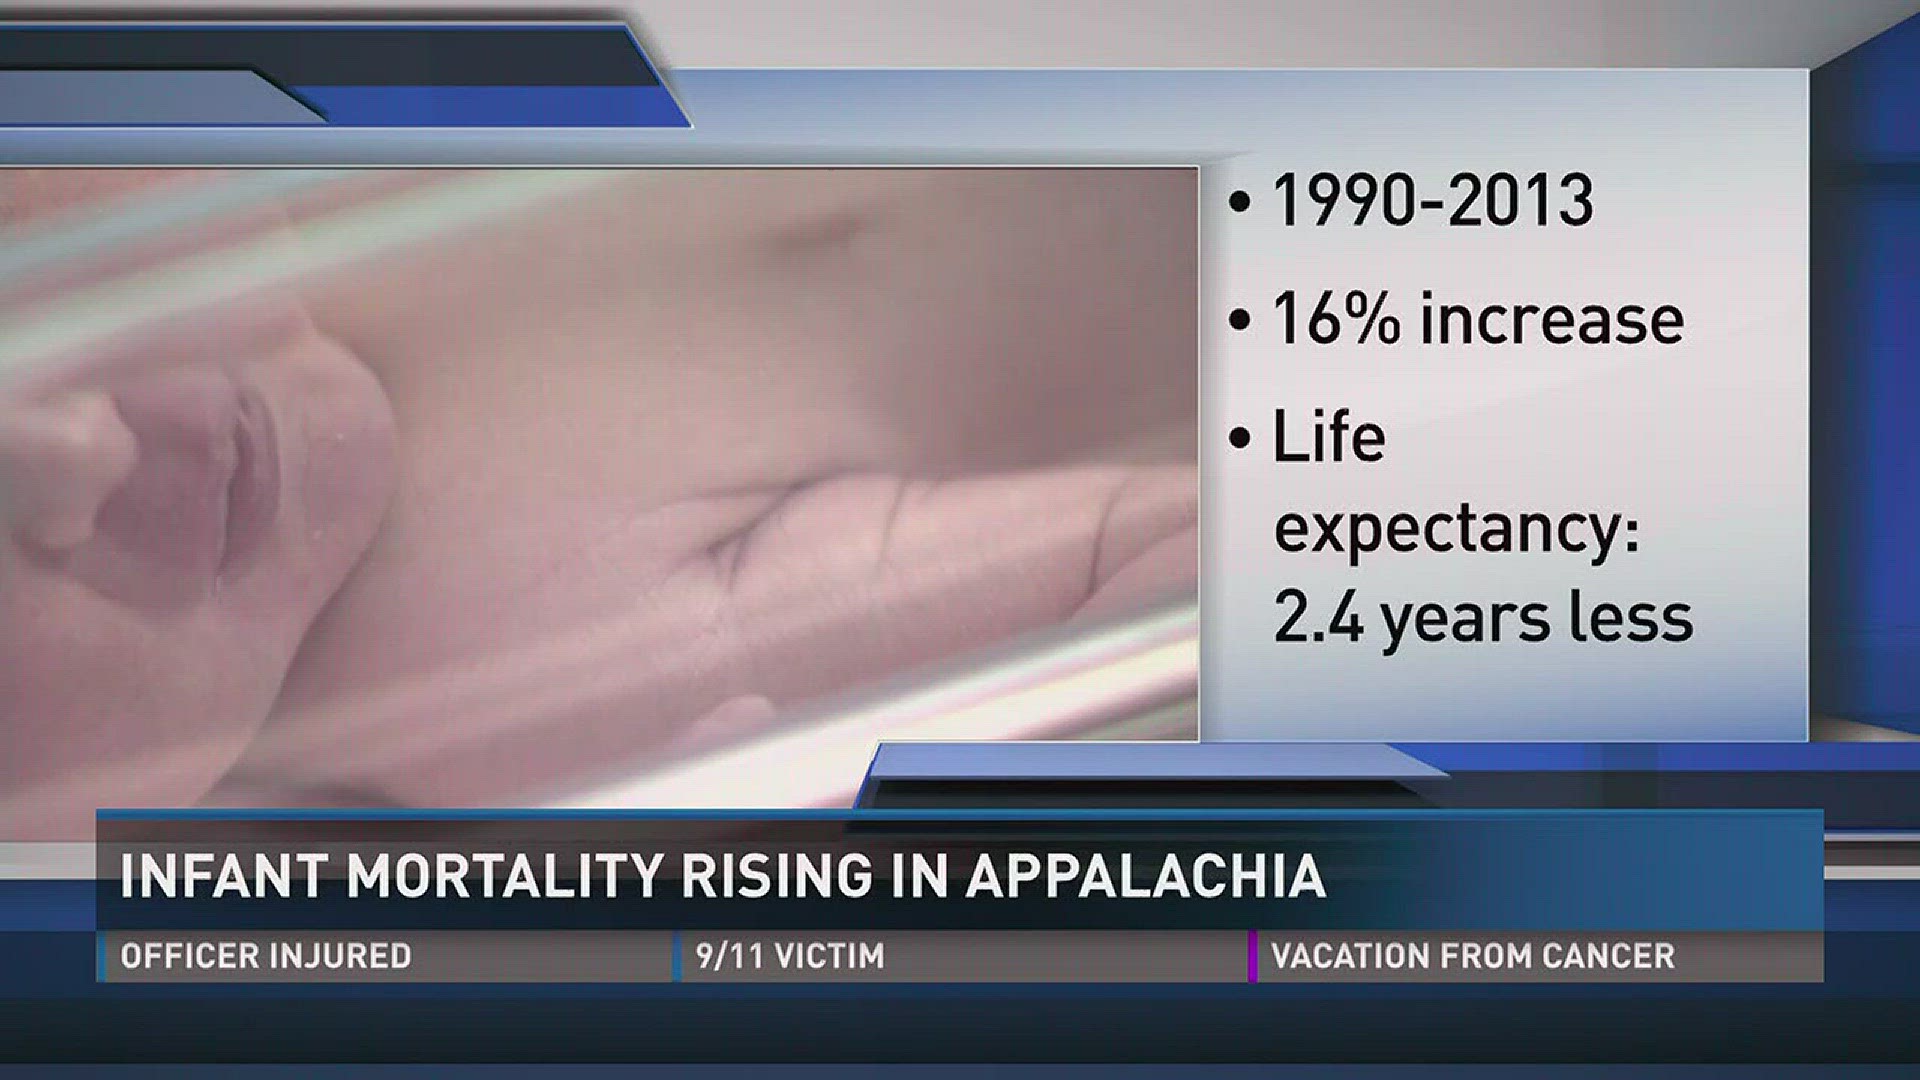 Aug. 7, 2017: A new study shows the infant mortality rate continues to rise in the Appalachia region.